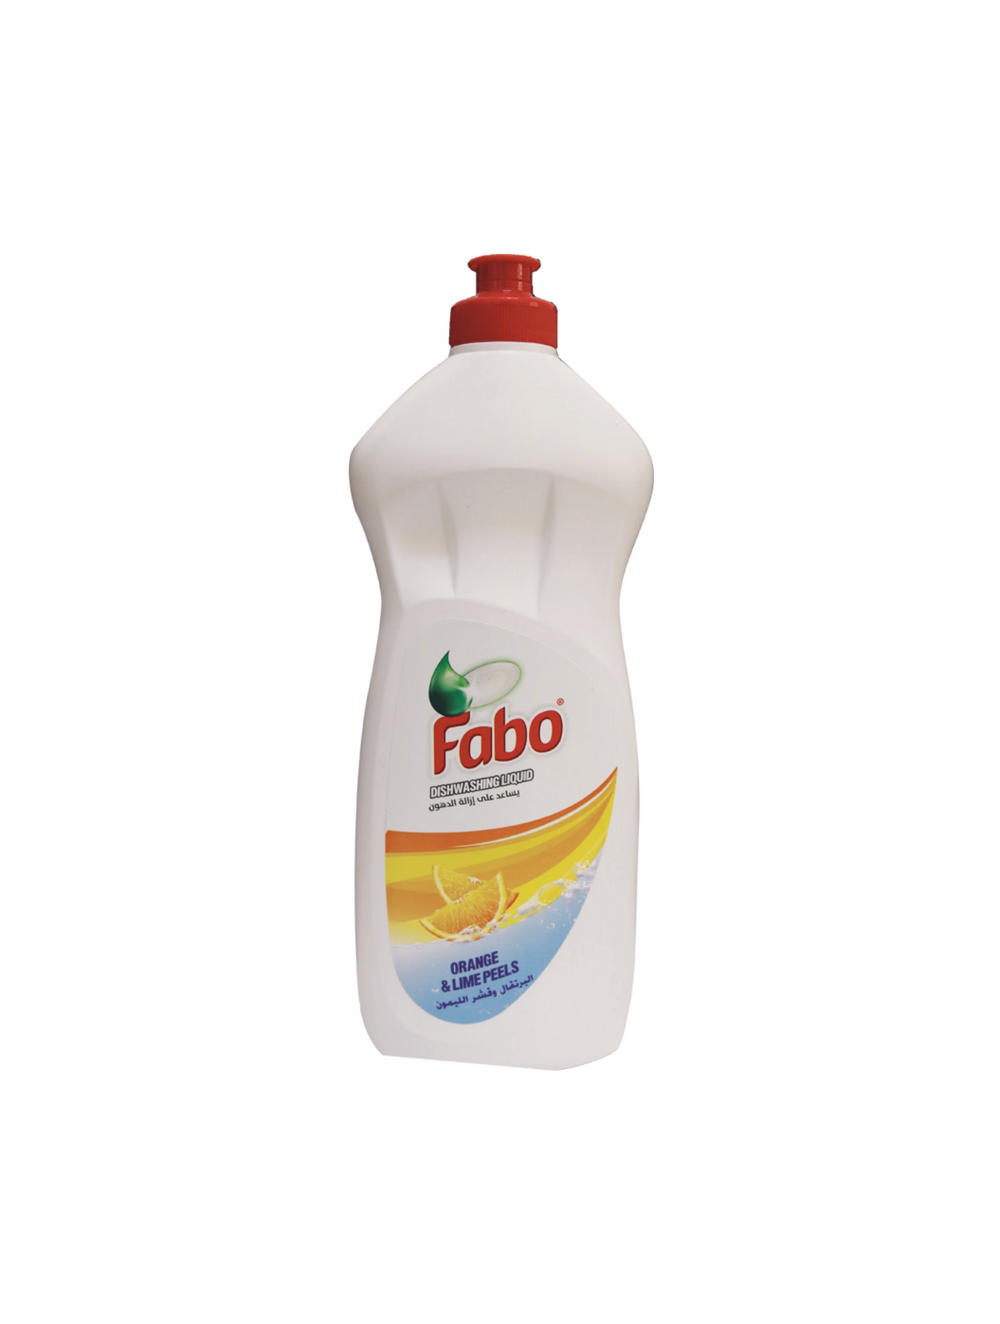 fabo-products_page-0018